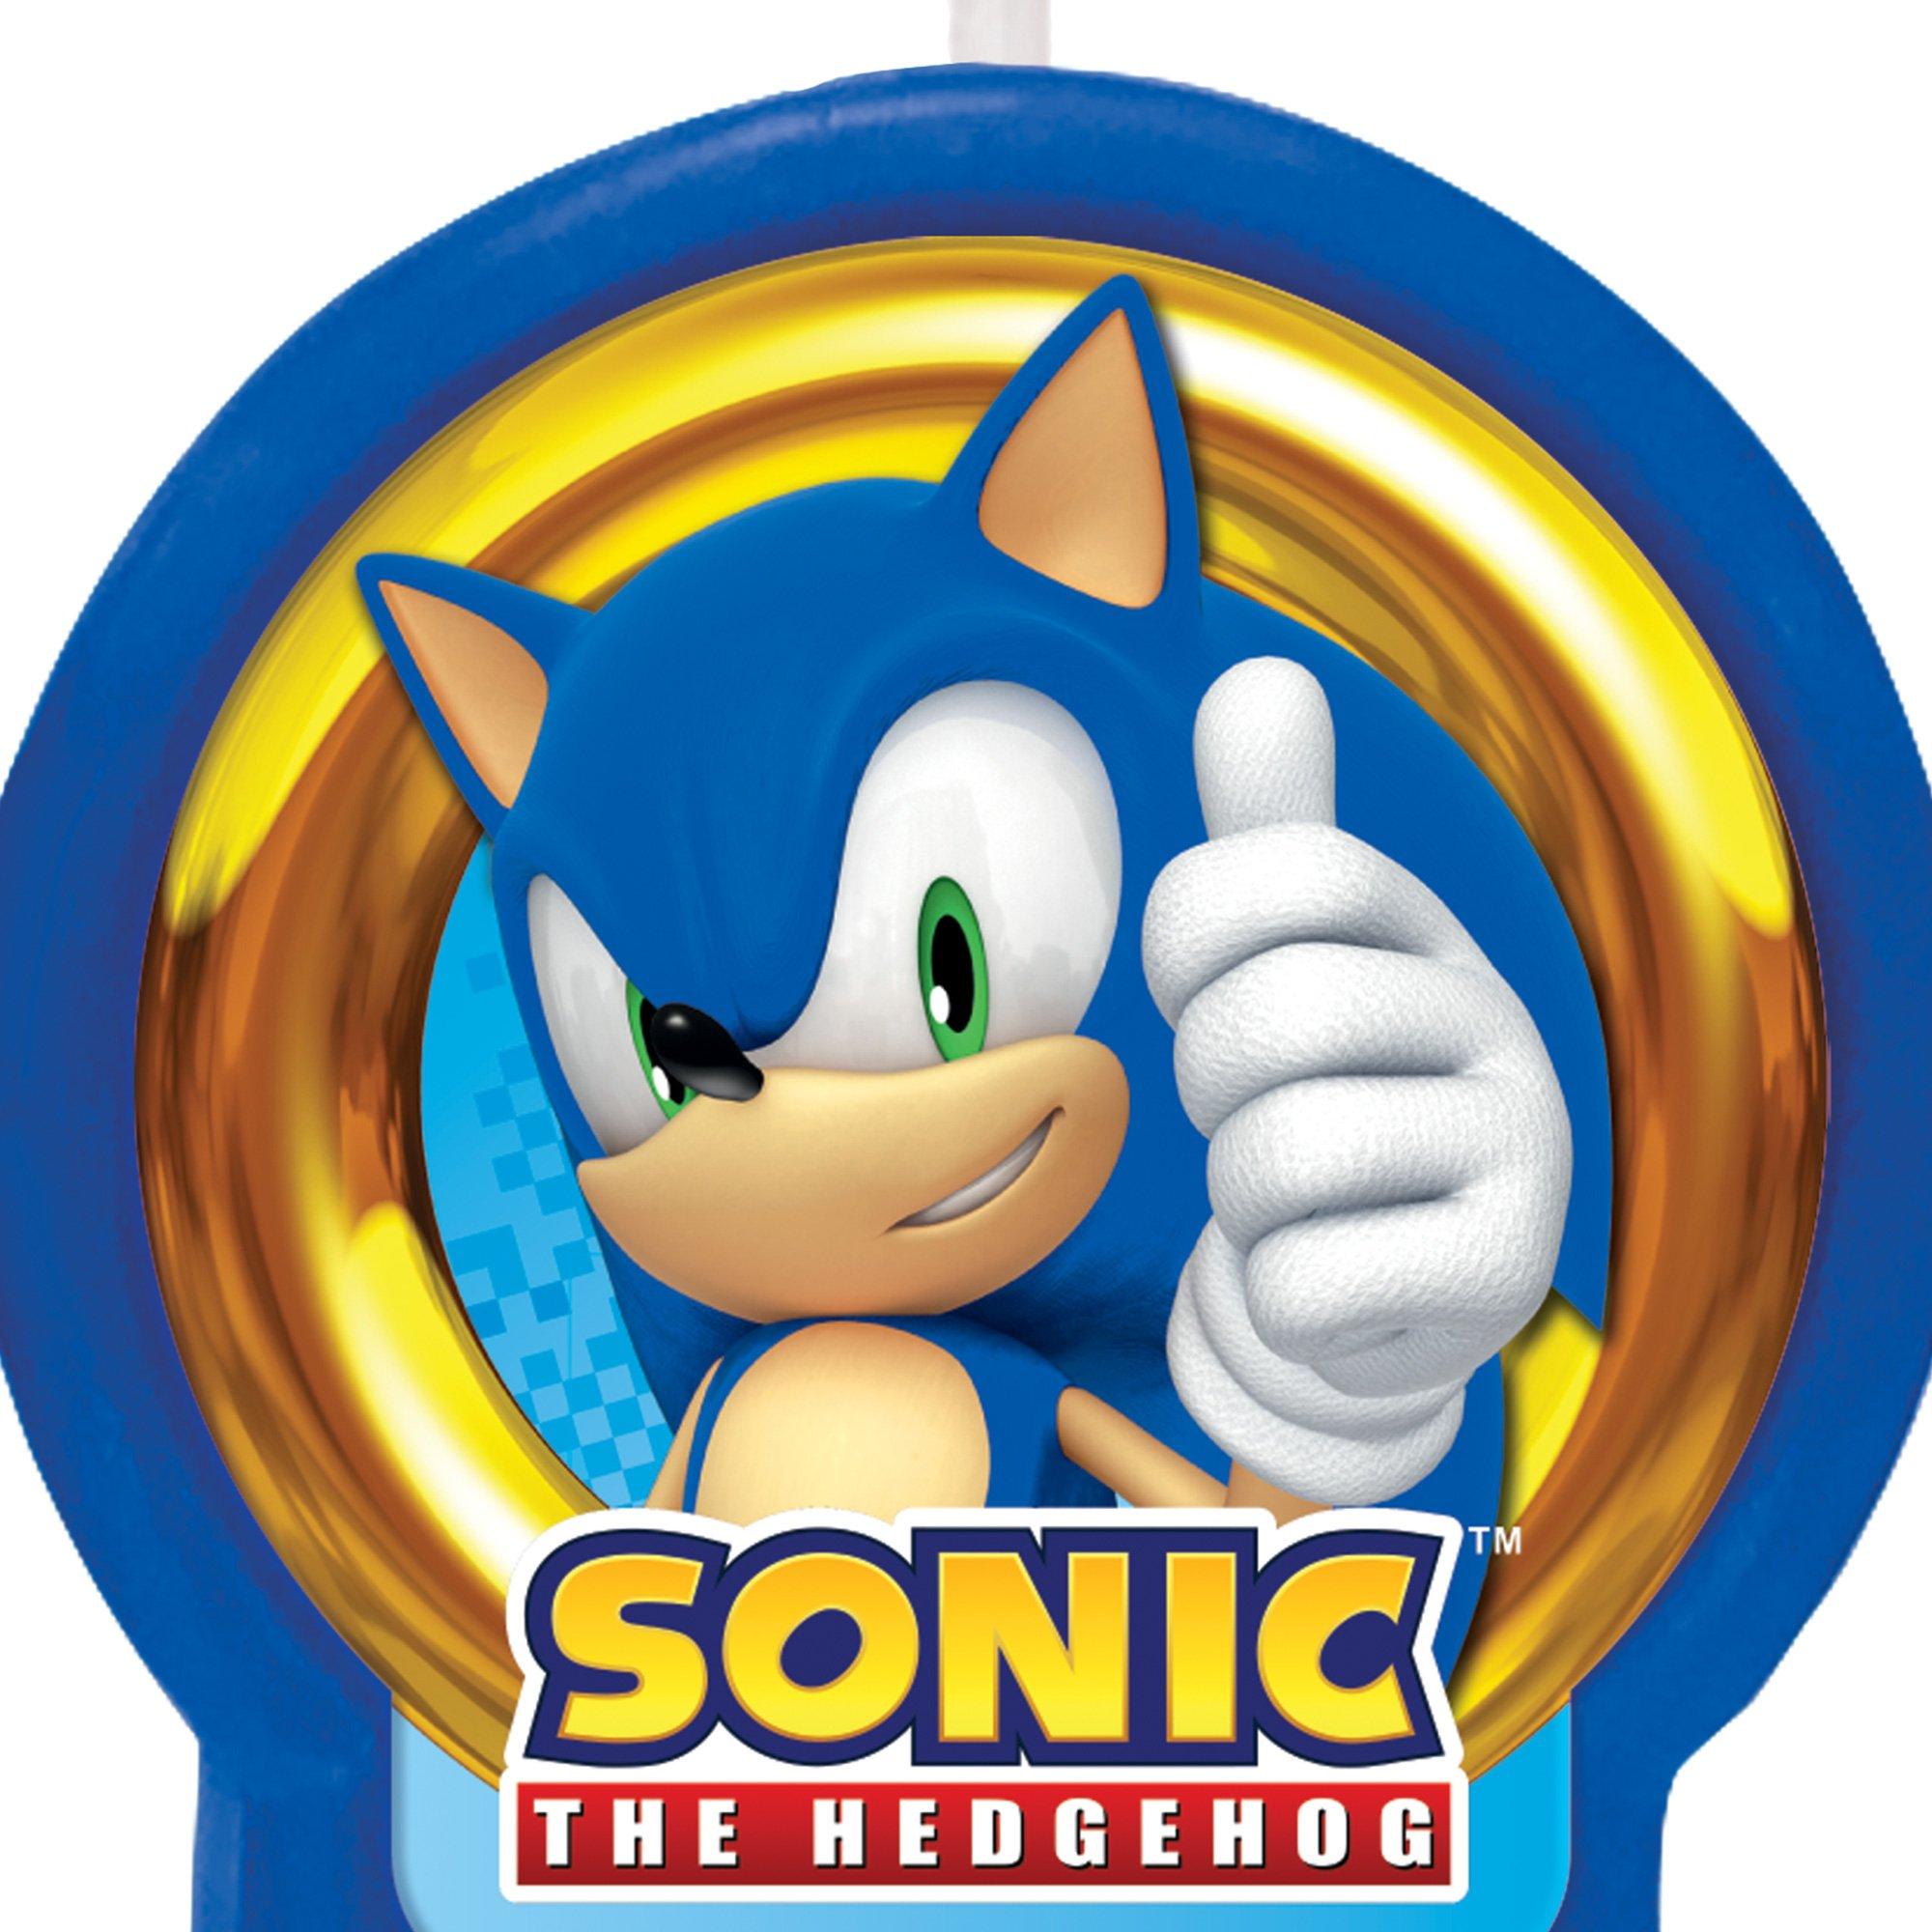 Sonic the Hedgehog Birthday Candle, 2.4in x 2.6in